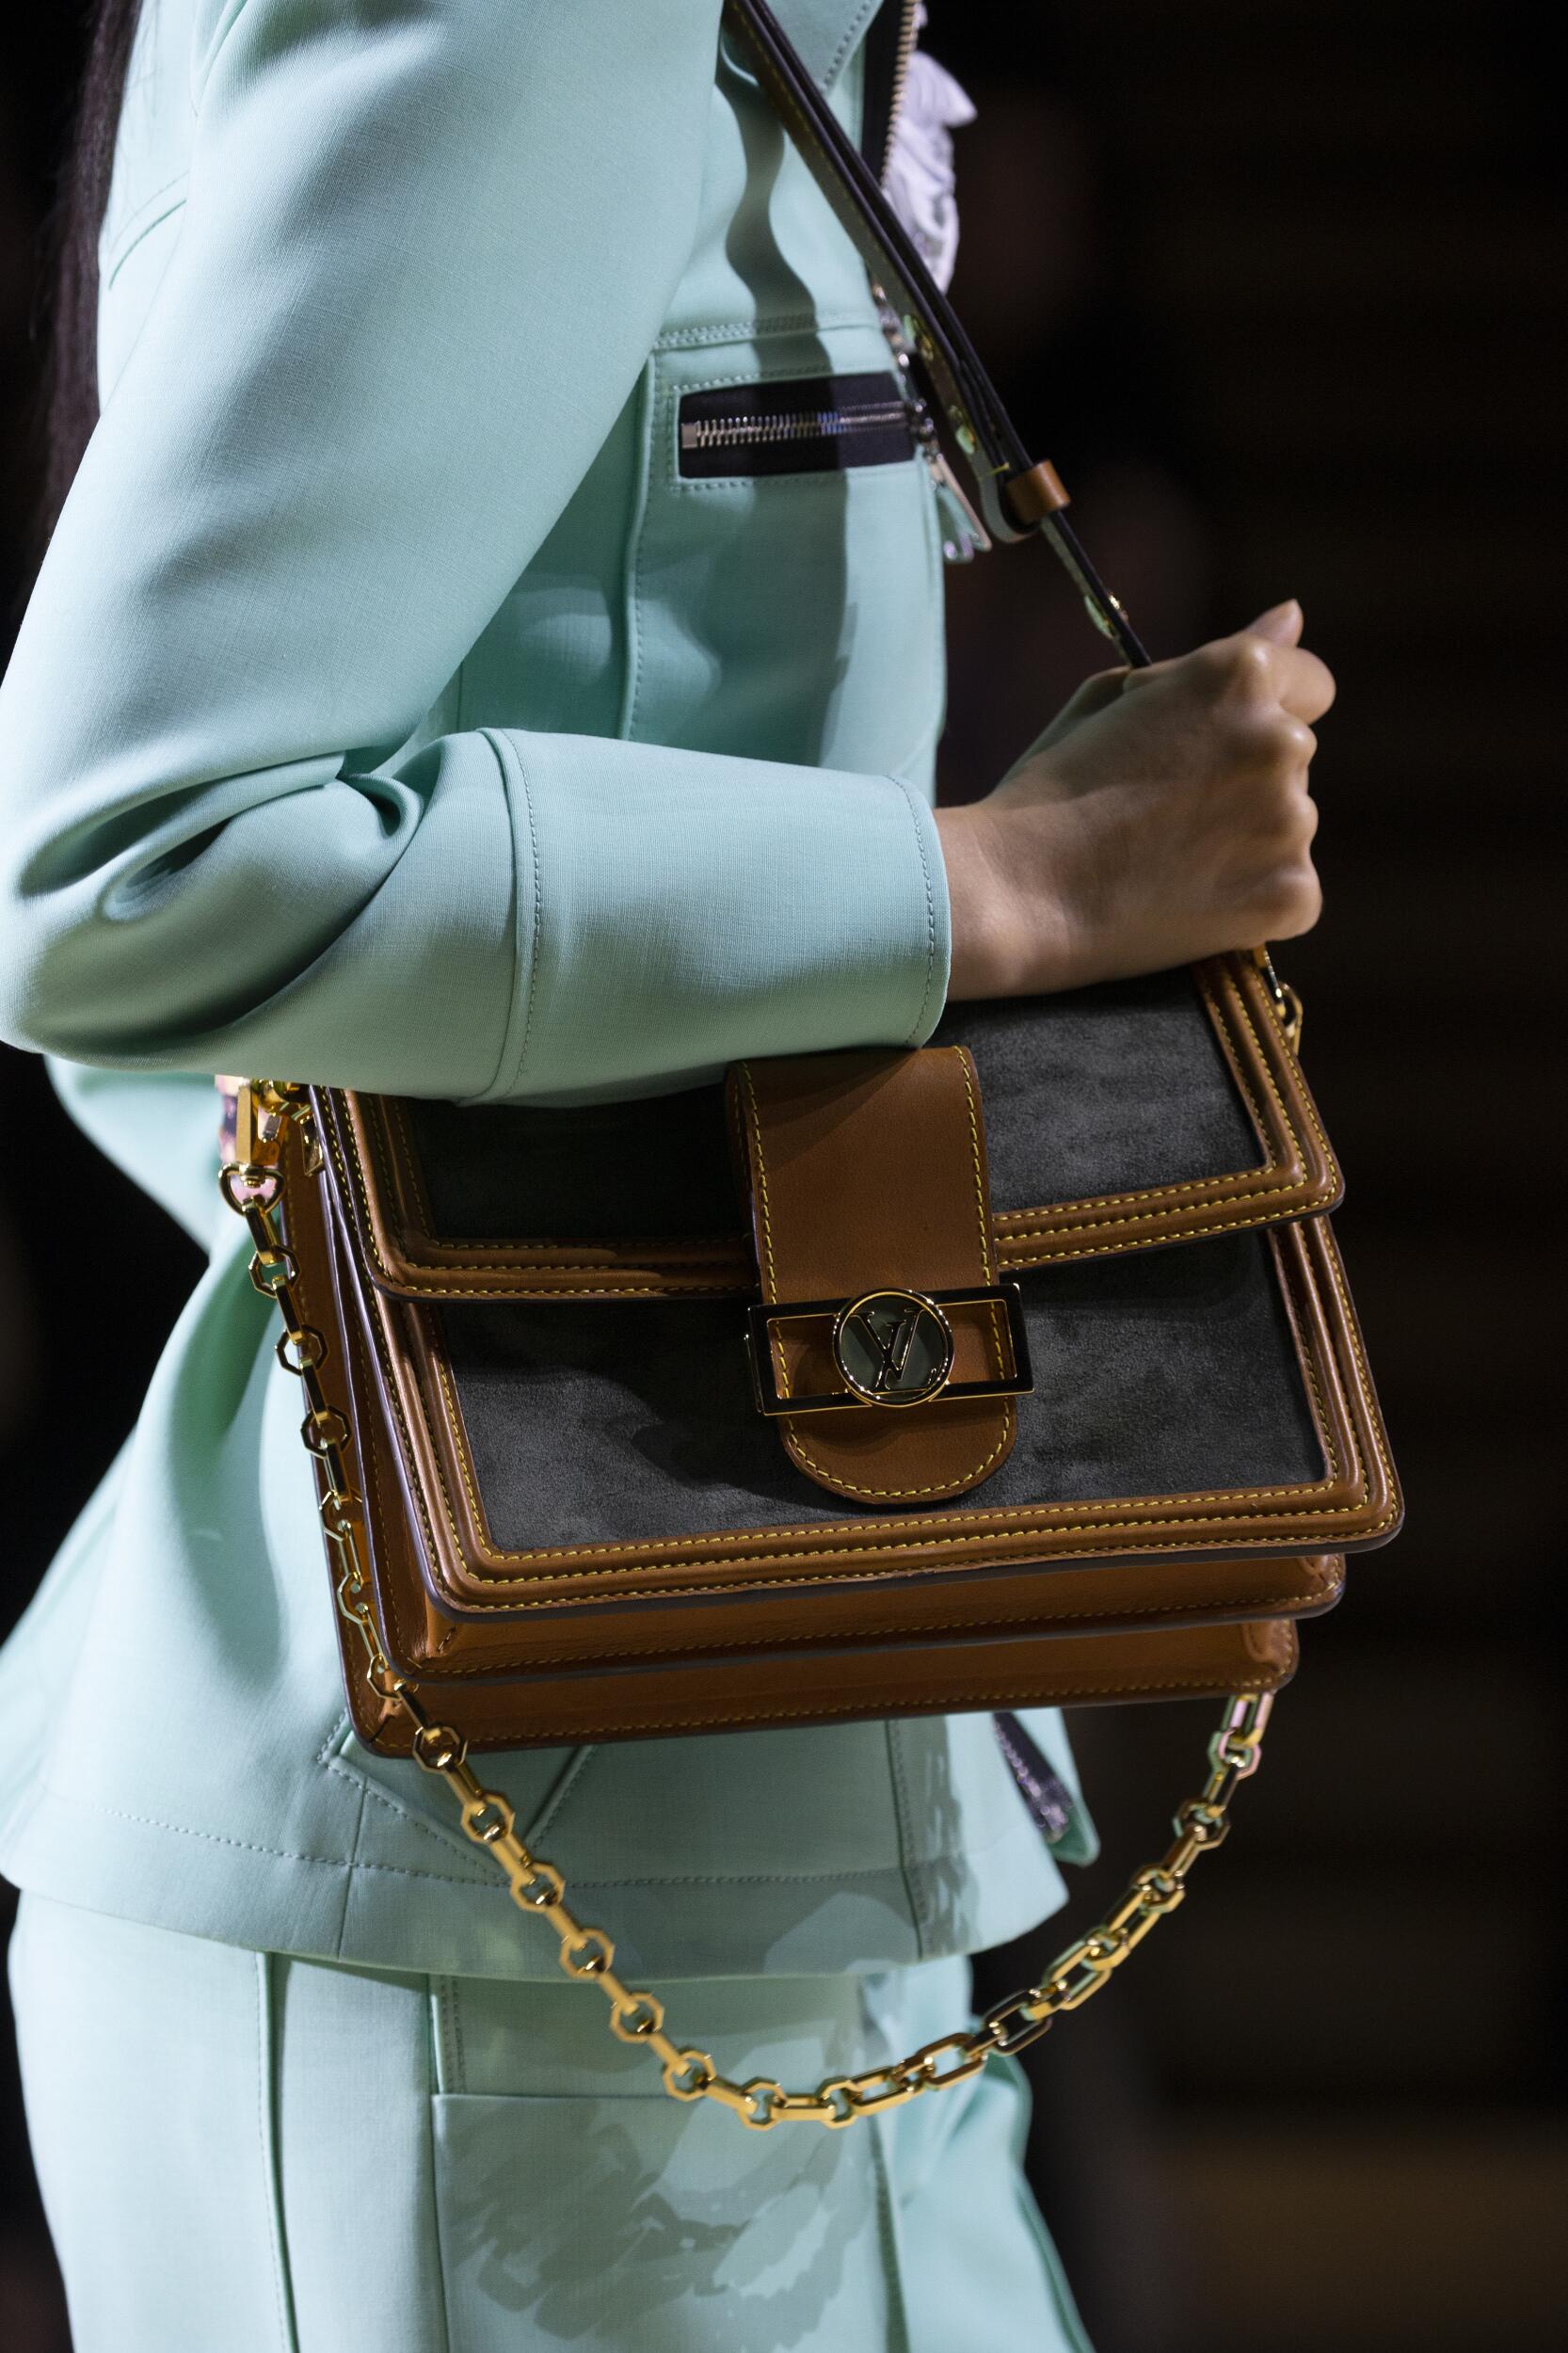 LOUIS VUITTON SPRING SUMMER 2020 WOMEN’S COLLECTION DETAILS | The Skinny Beep